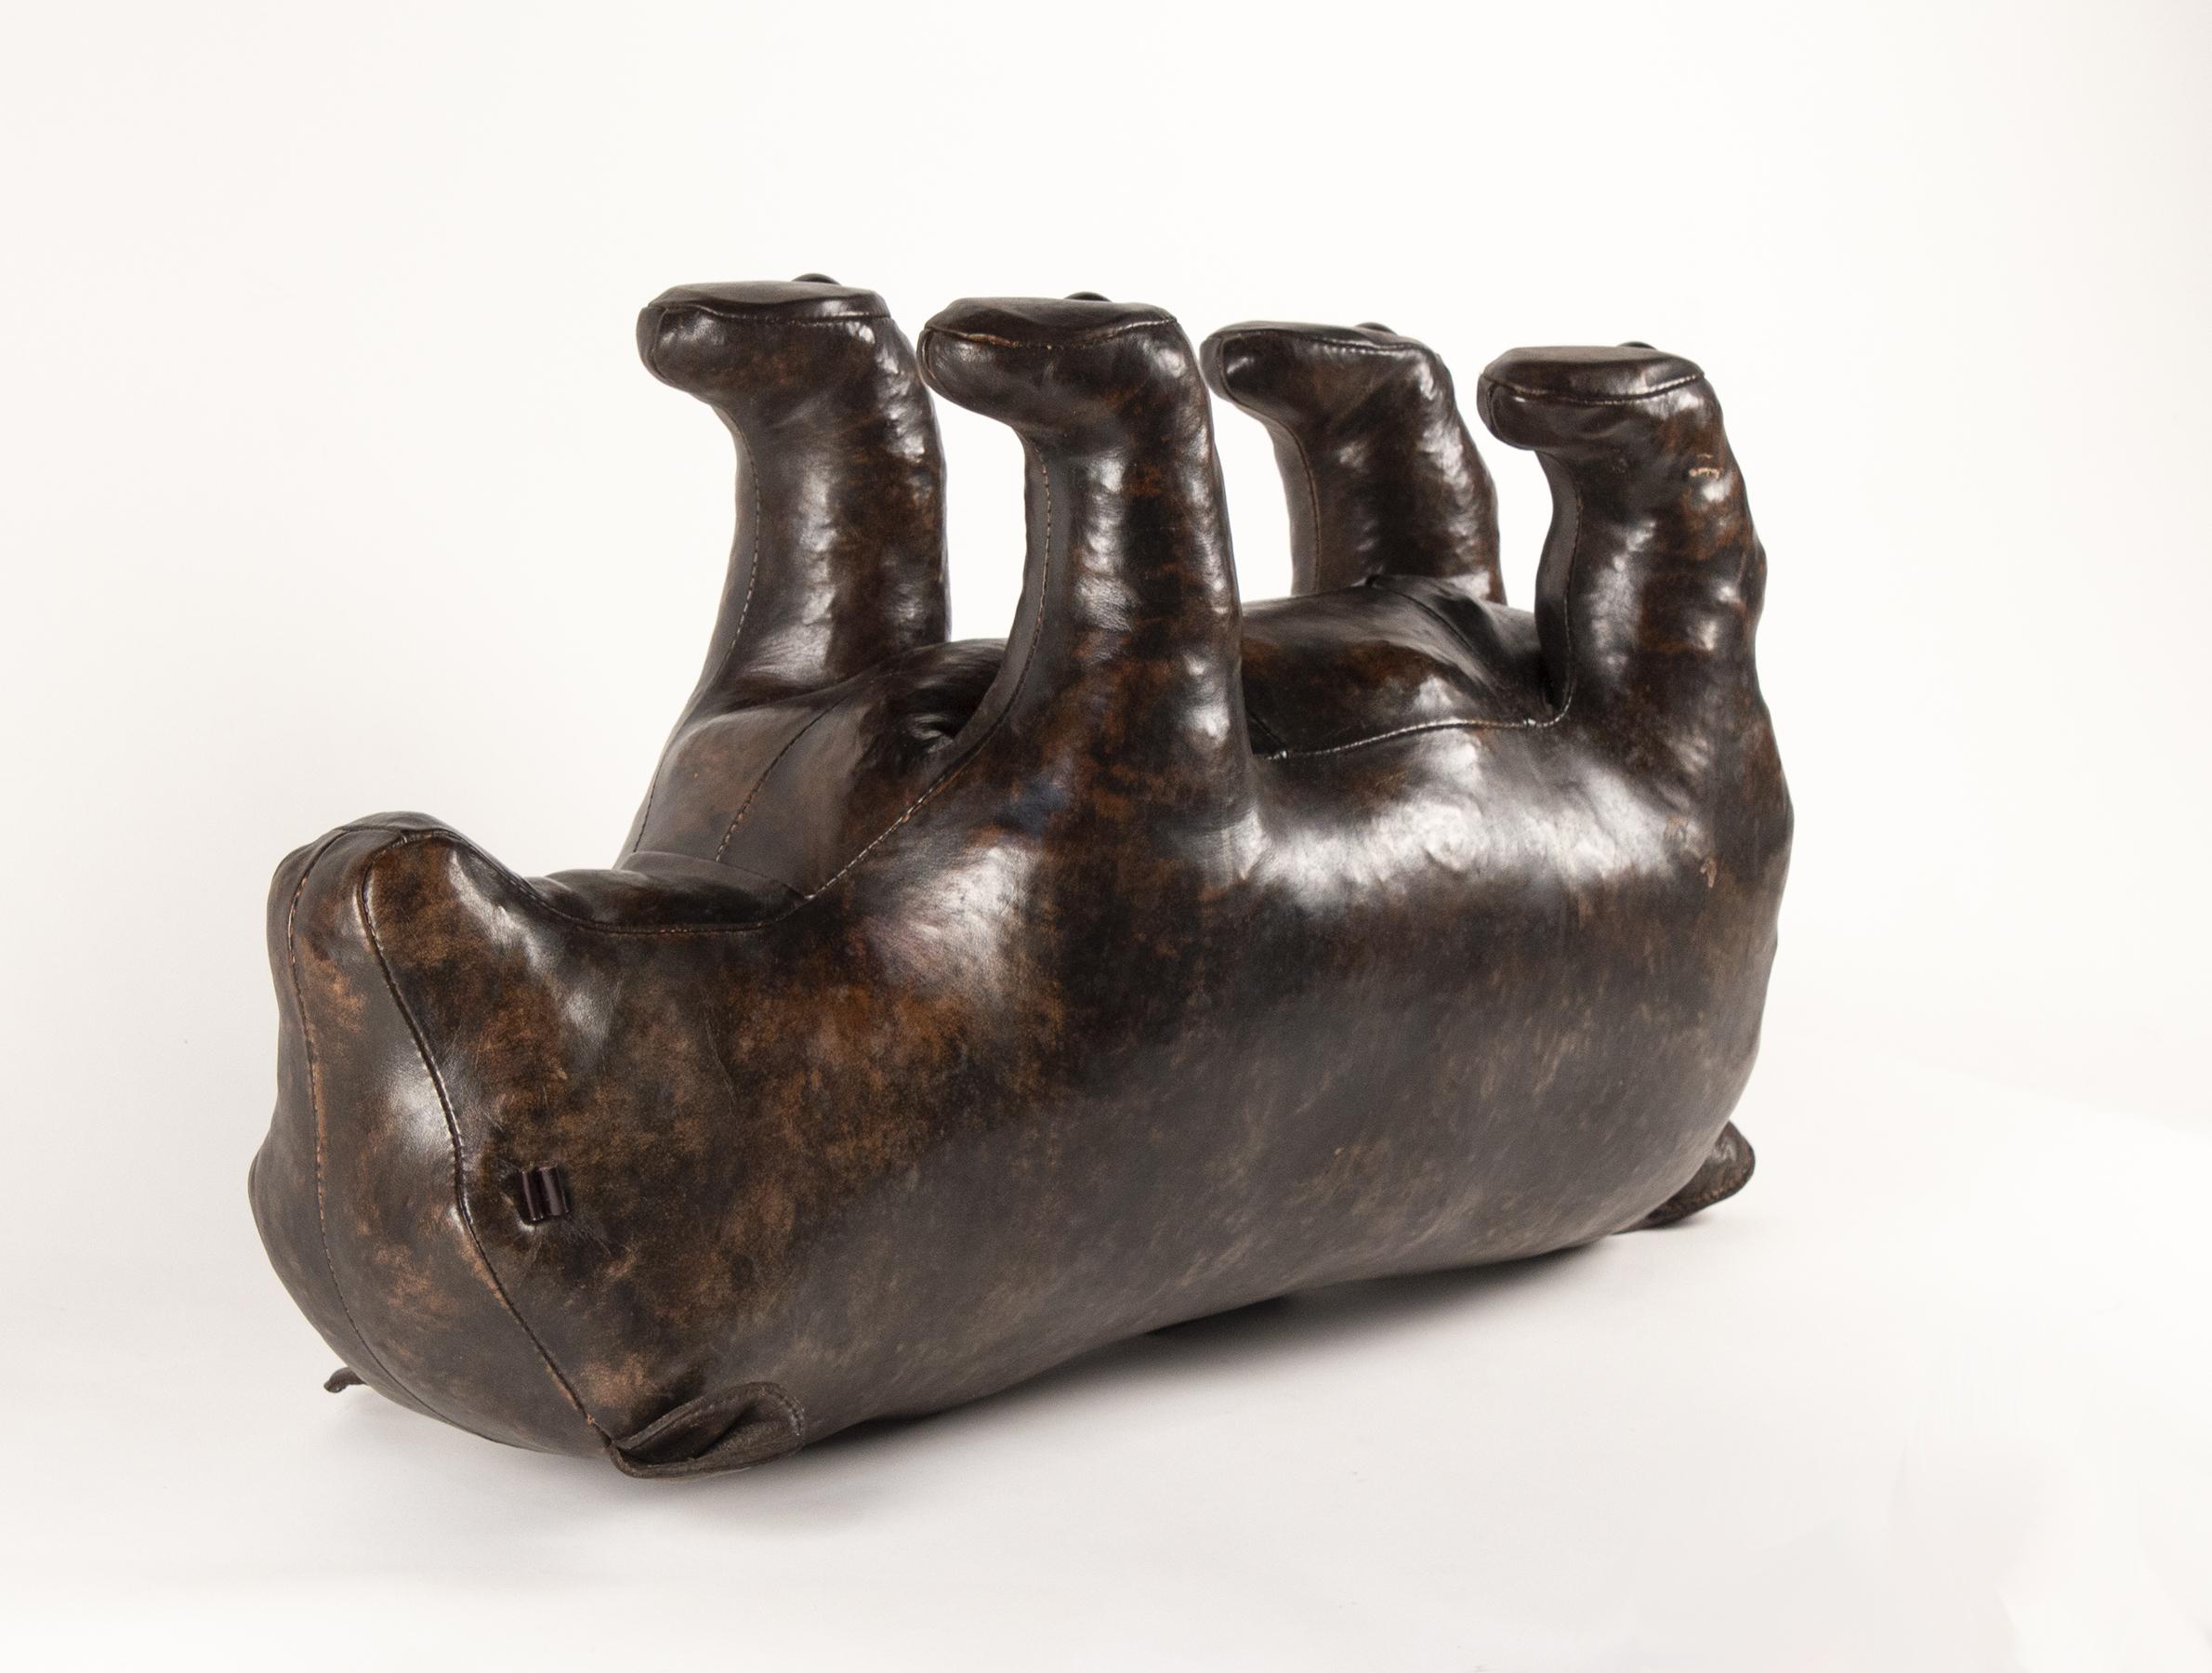 Omersa Bear Sculpture / Footstool in Leather By Dimitri Omersa 1